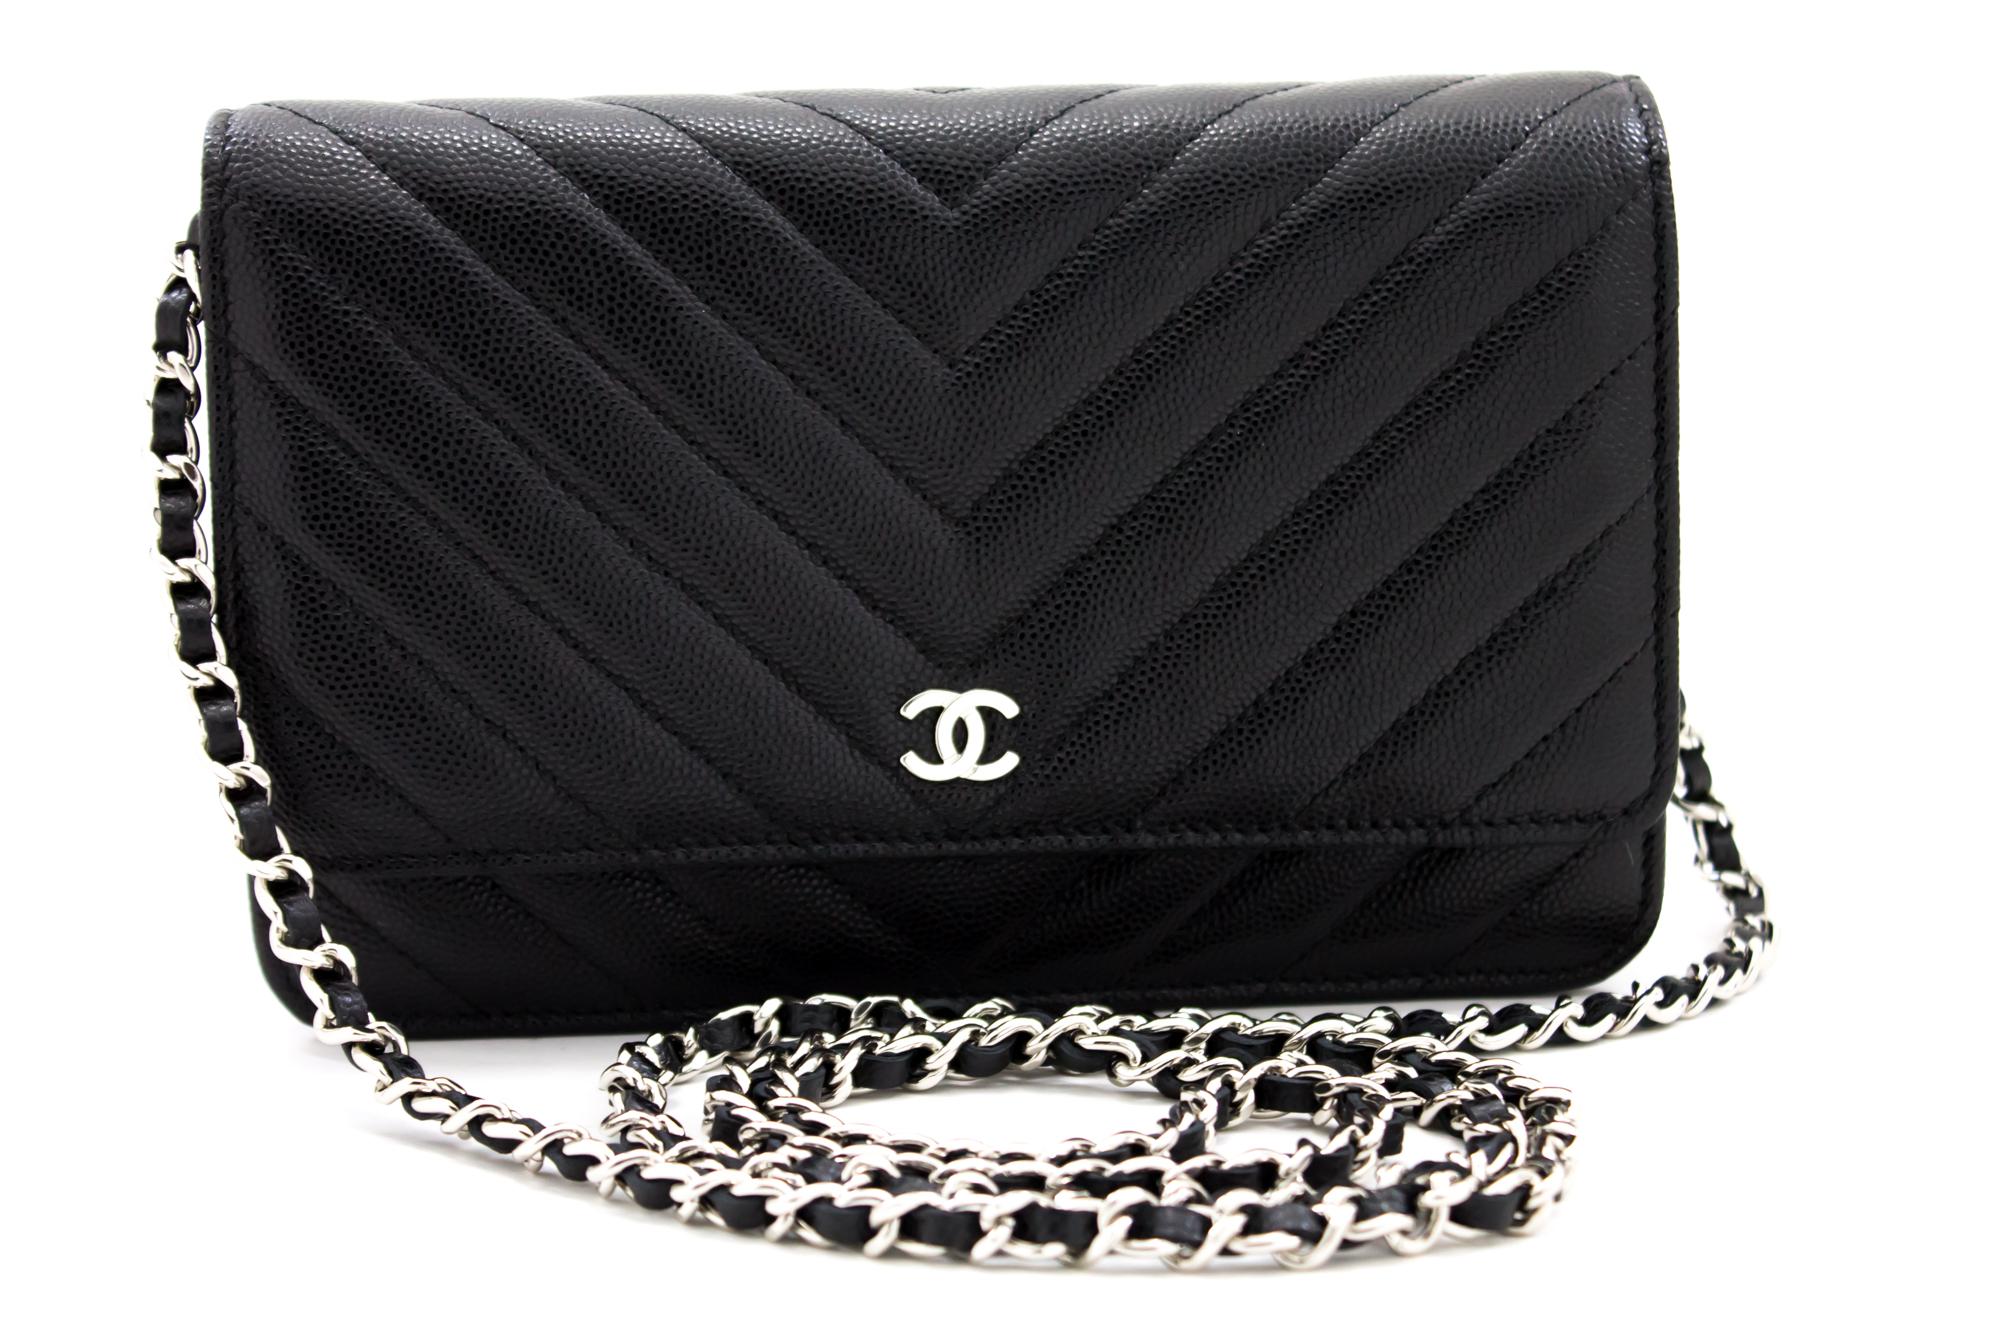 An authentic CHANEL Caviar V-Stitch WOC Wallet On Chain Black Shoulder Bag. The color is Black. The outside material is Leather. The pattern is Solid. This item is Contemporary. The year of manufacture would be 2018.
Conditions & Ratings
Outside